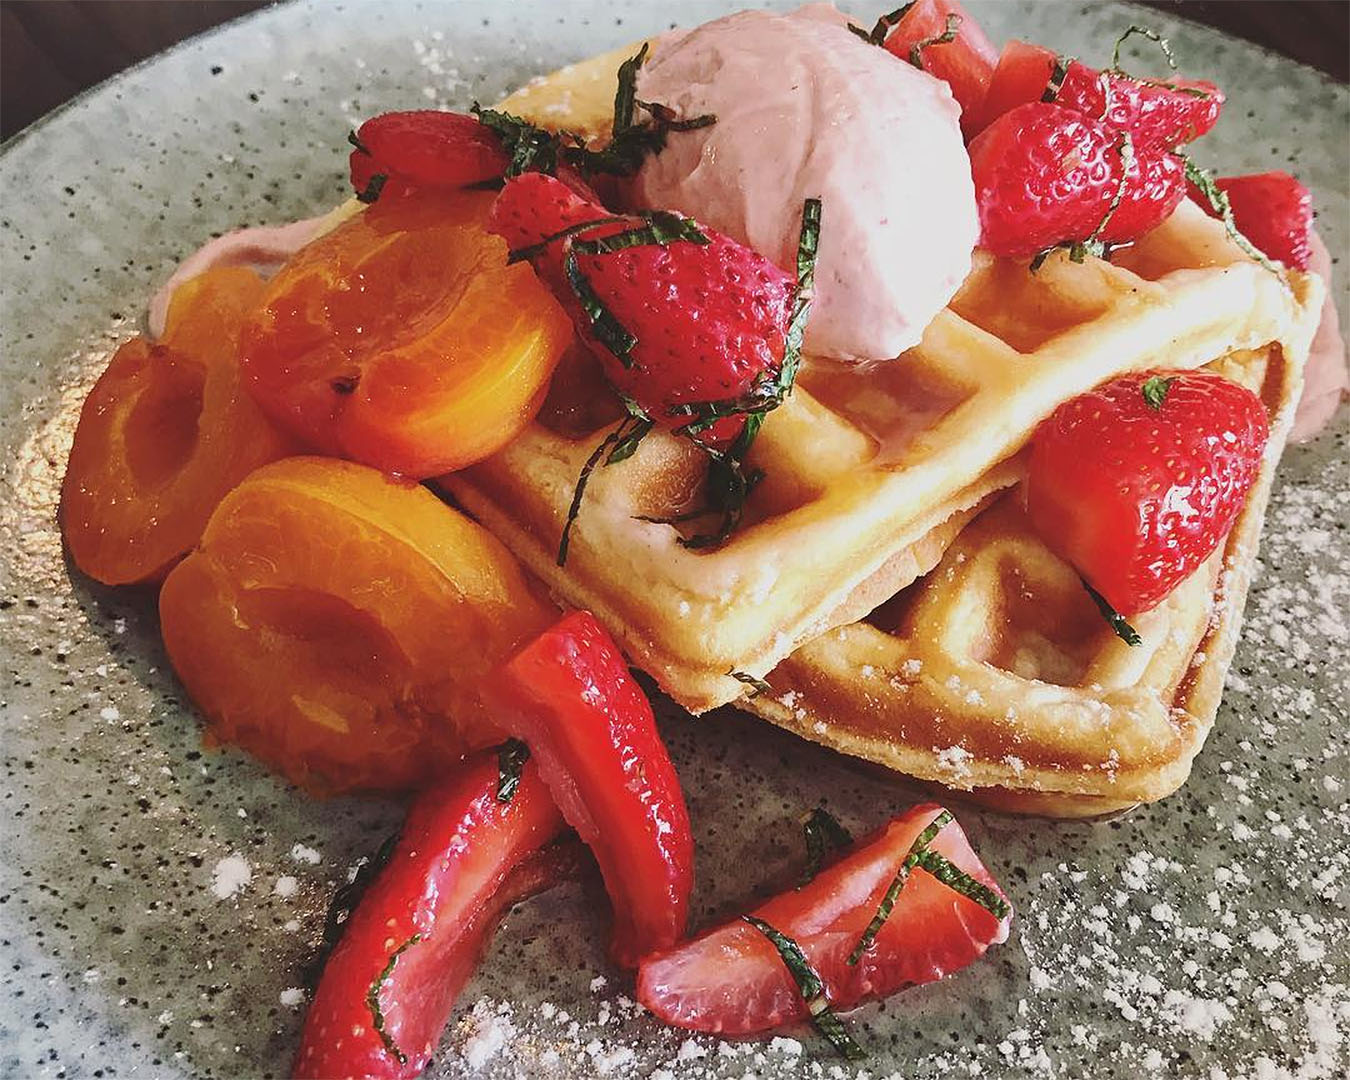 Amazing looking fruit waffles at Milk & Honey, one of the best cafes in Napier.